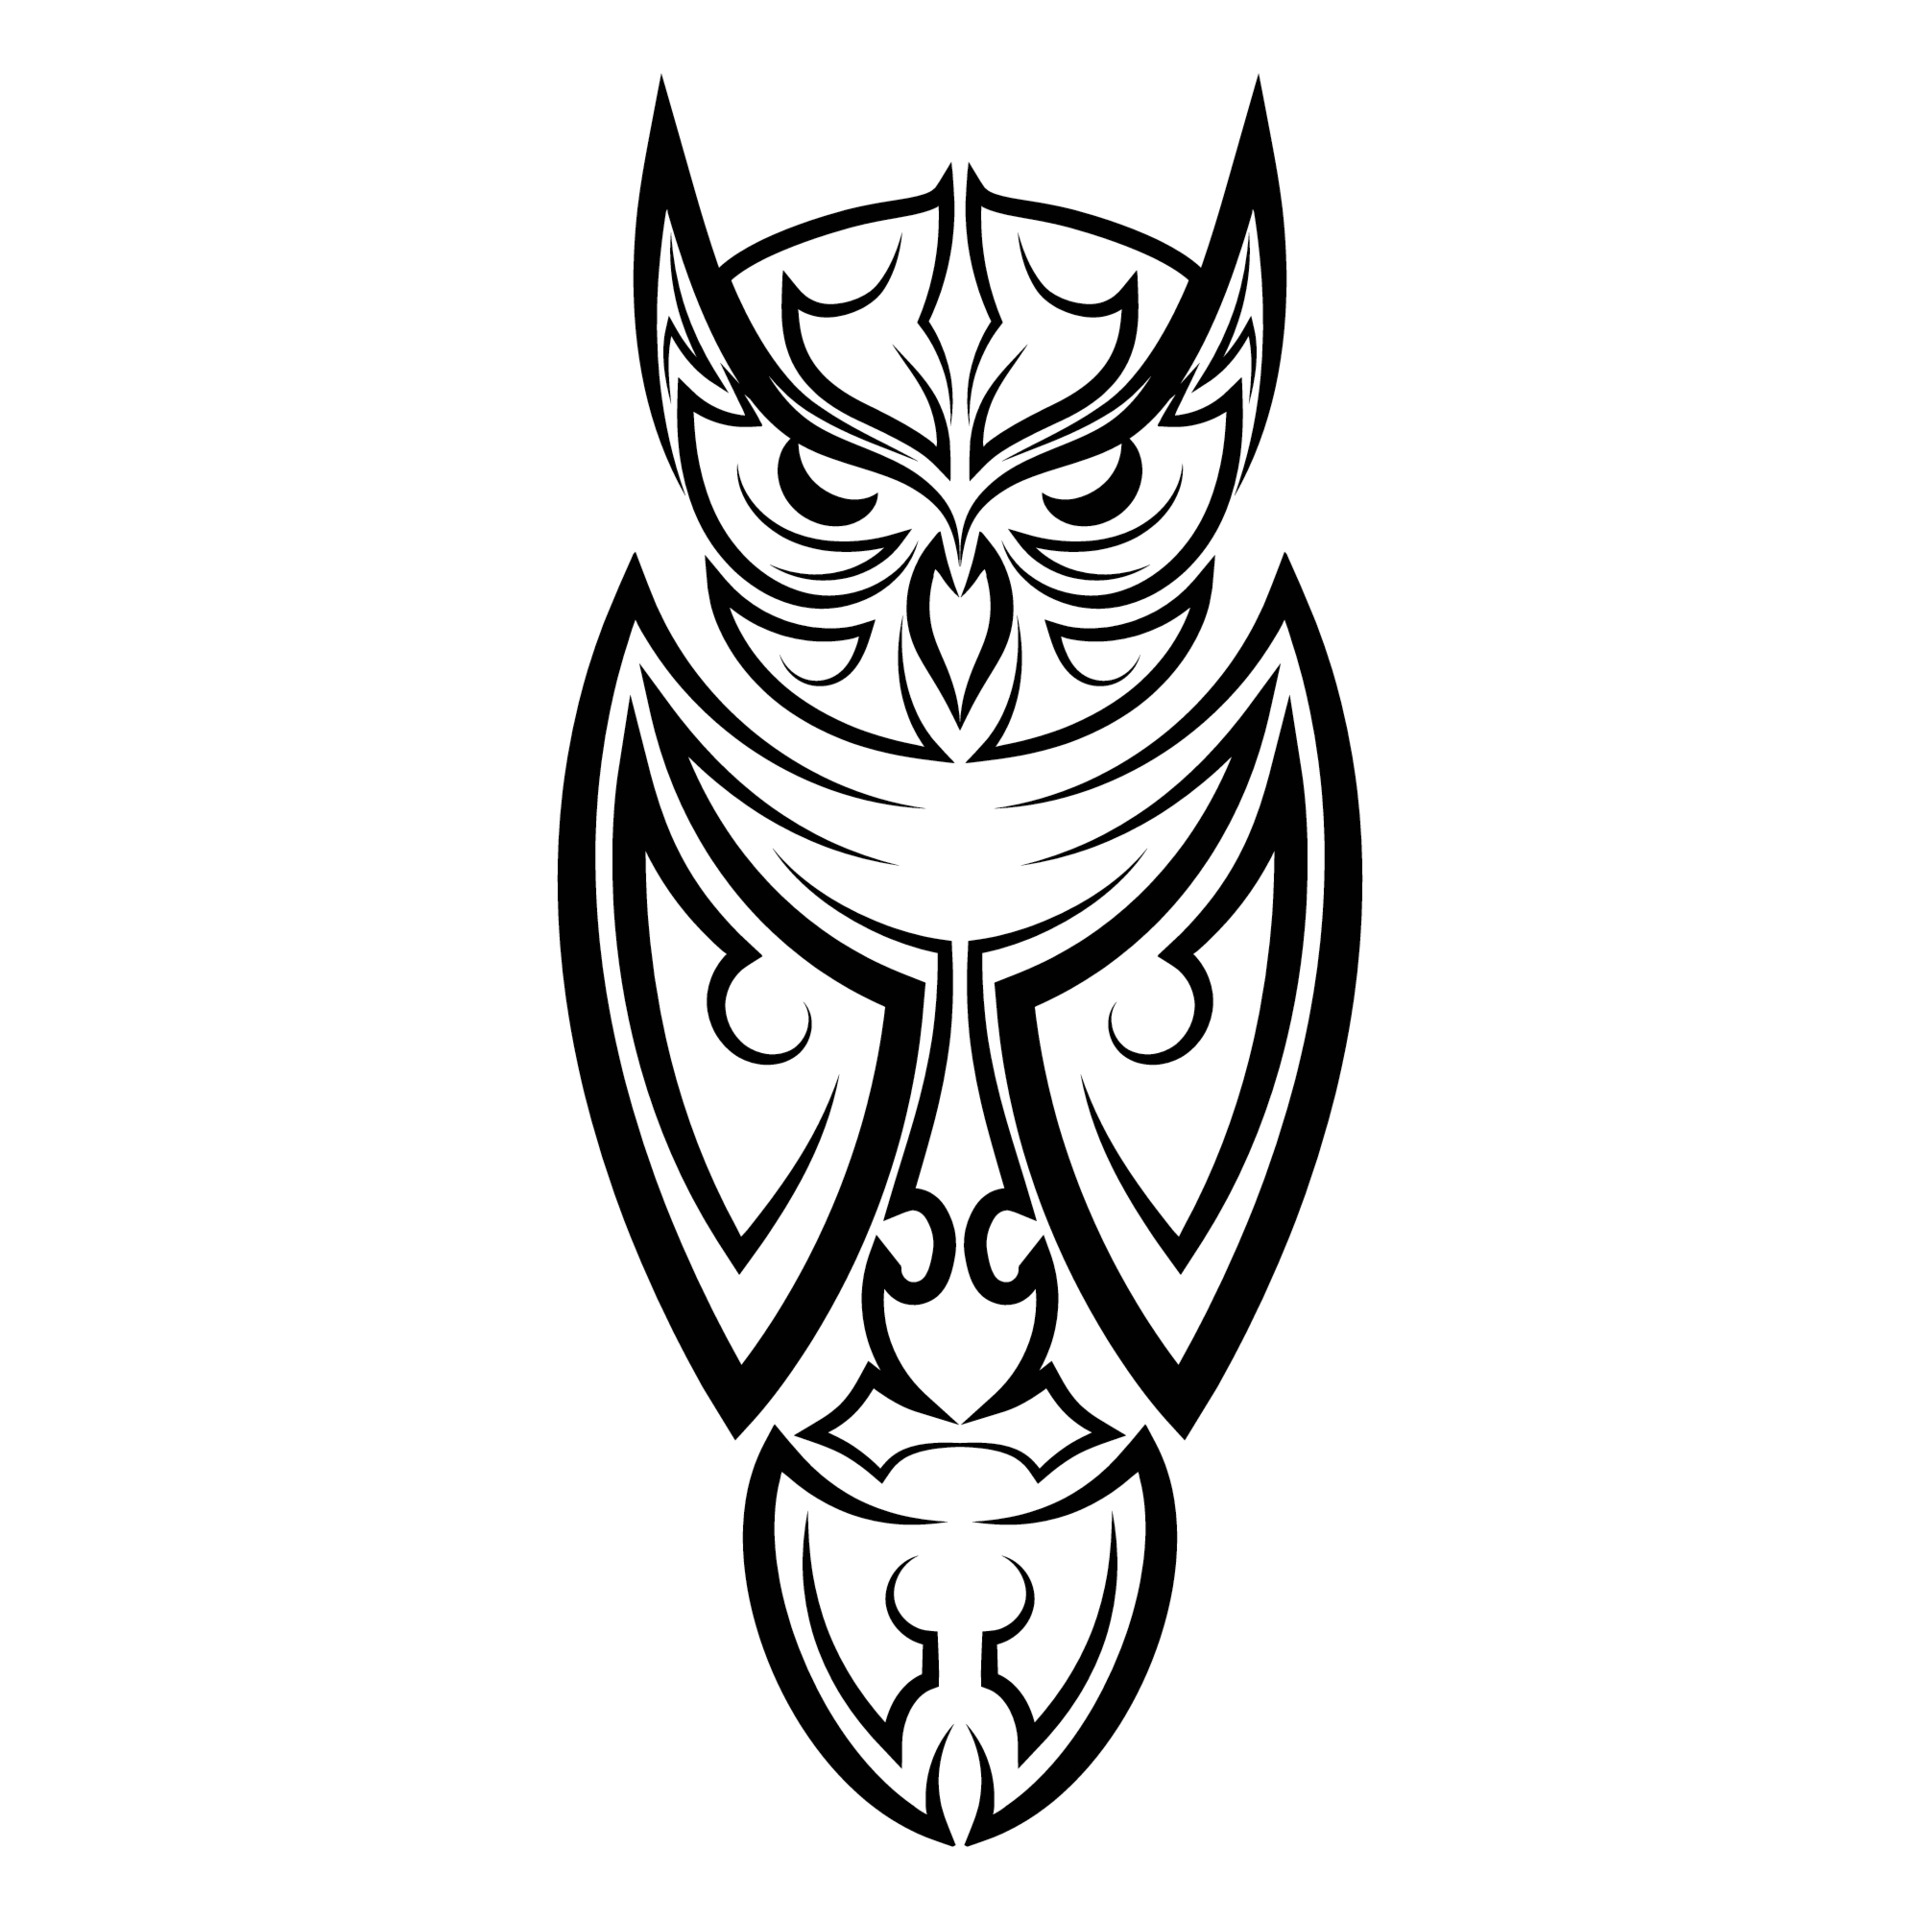 30 Inspirational Owl Tattoo Designs for Men and Women in 2022